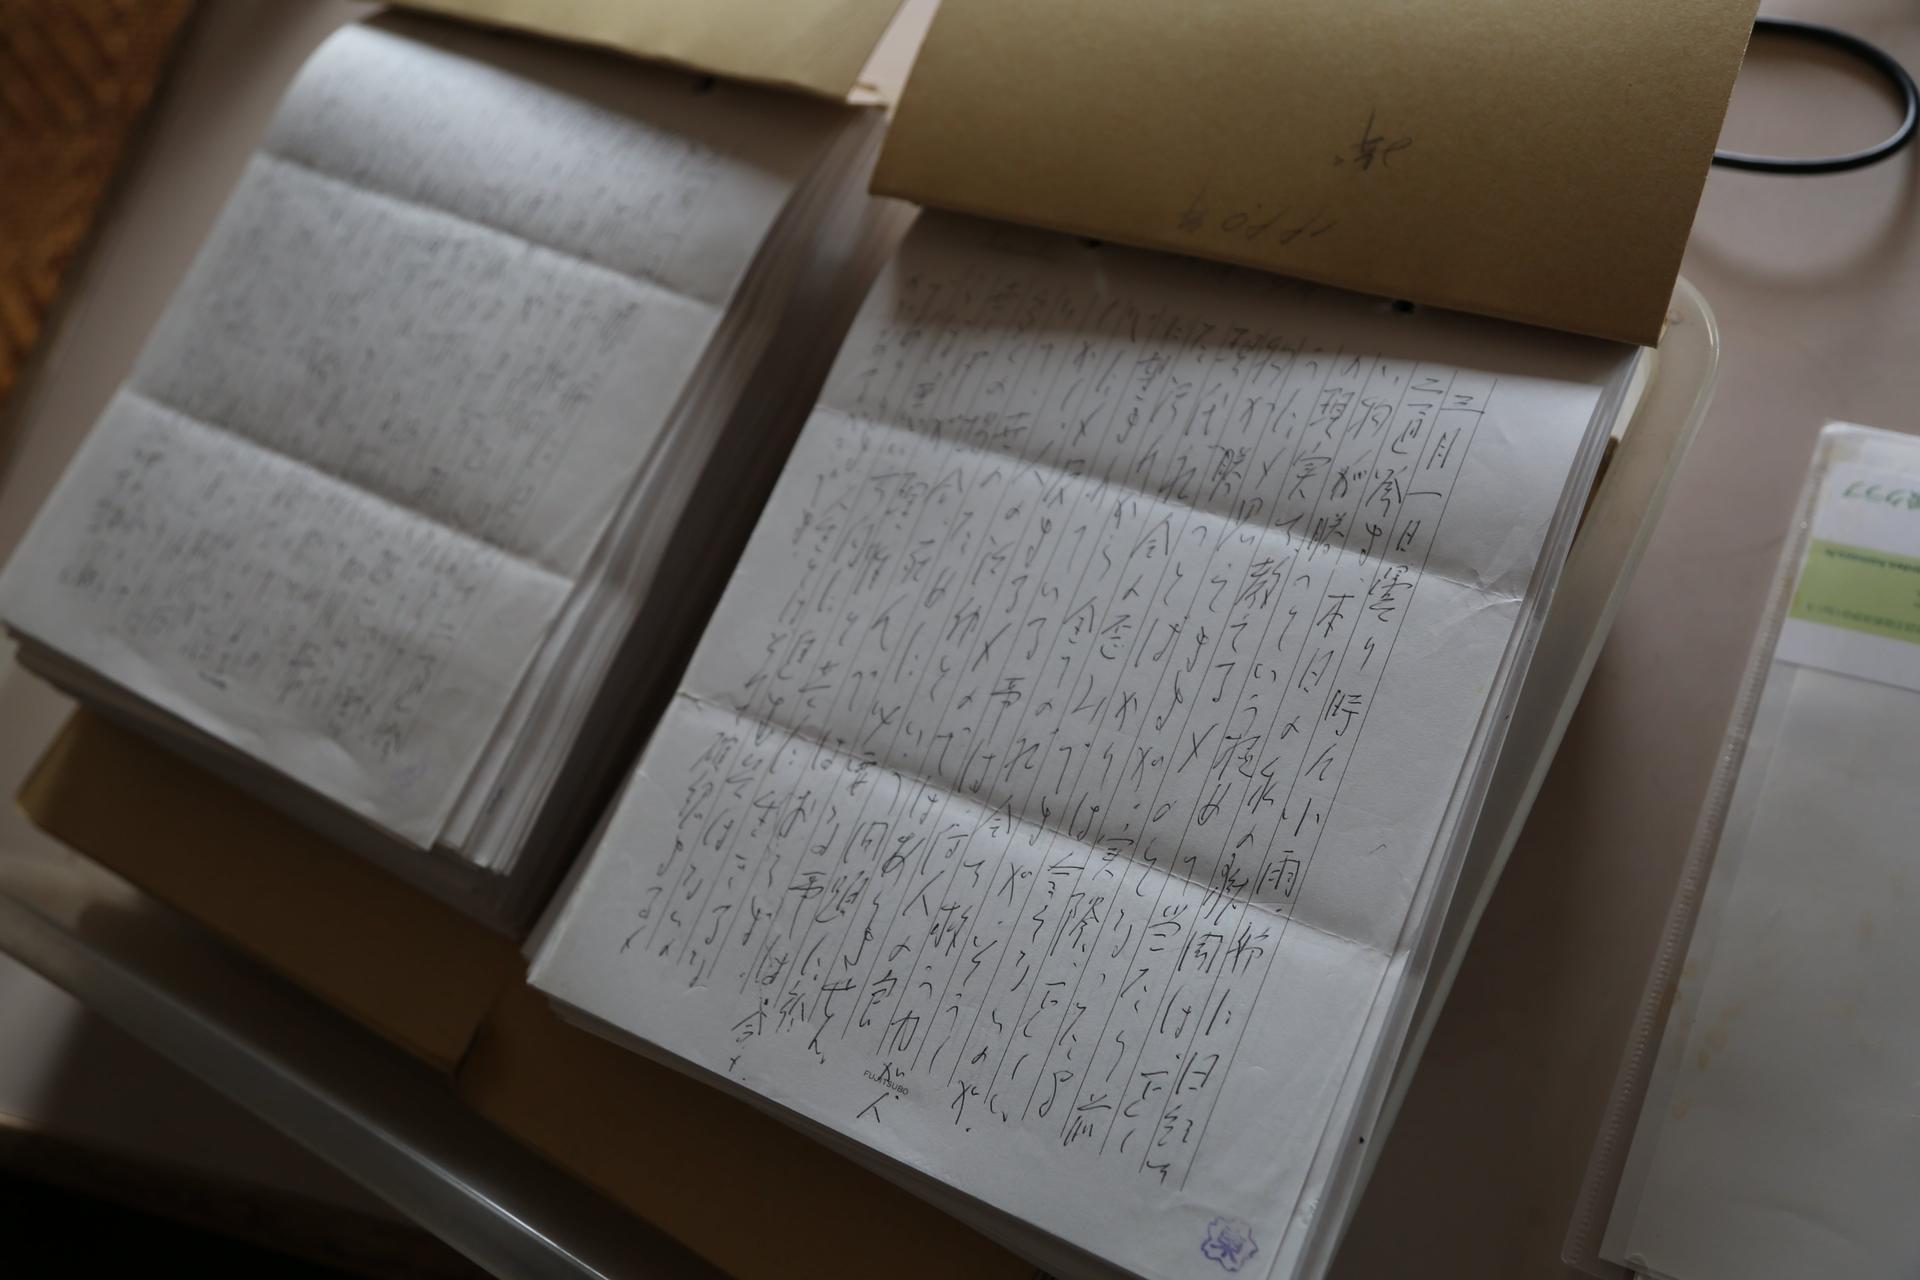 several pages of paper with letters in Japanese